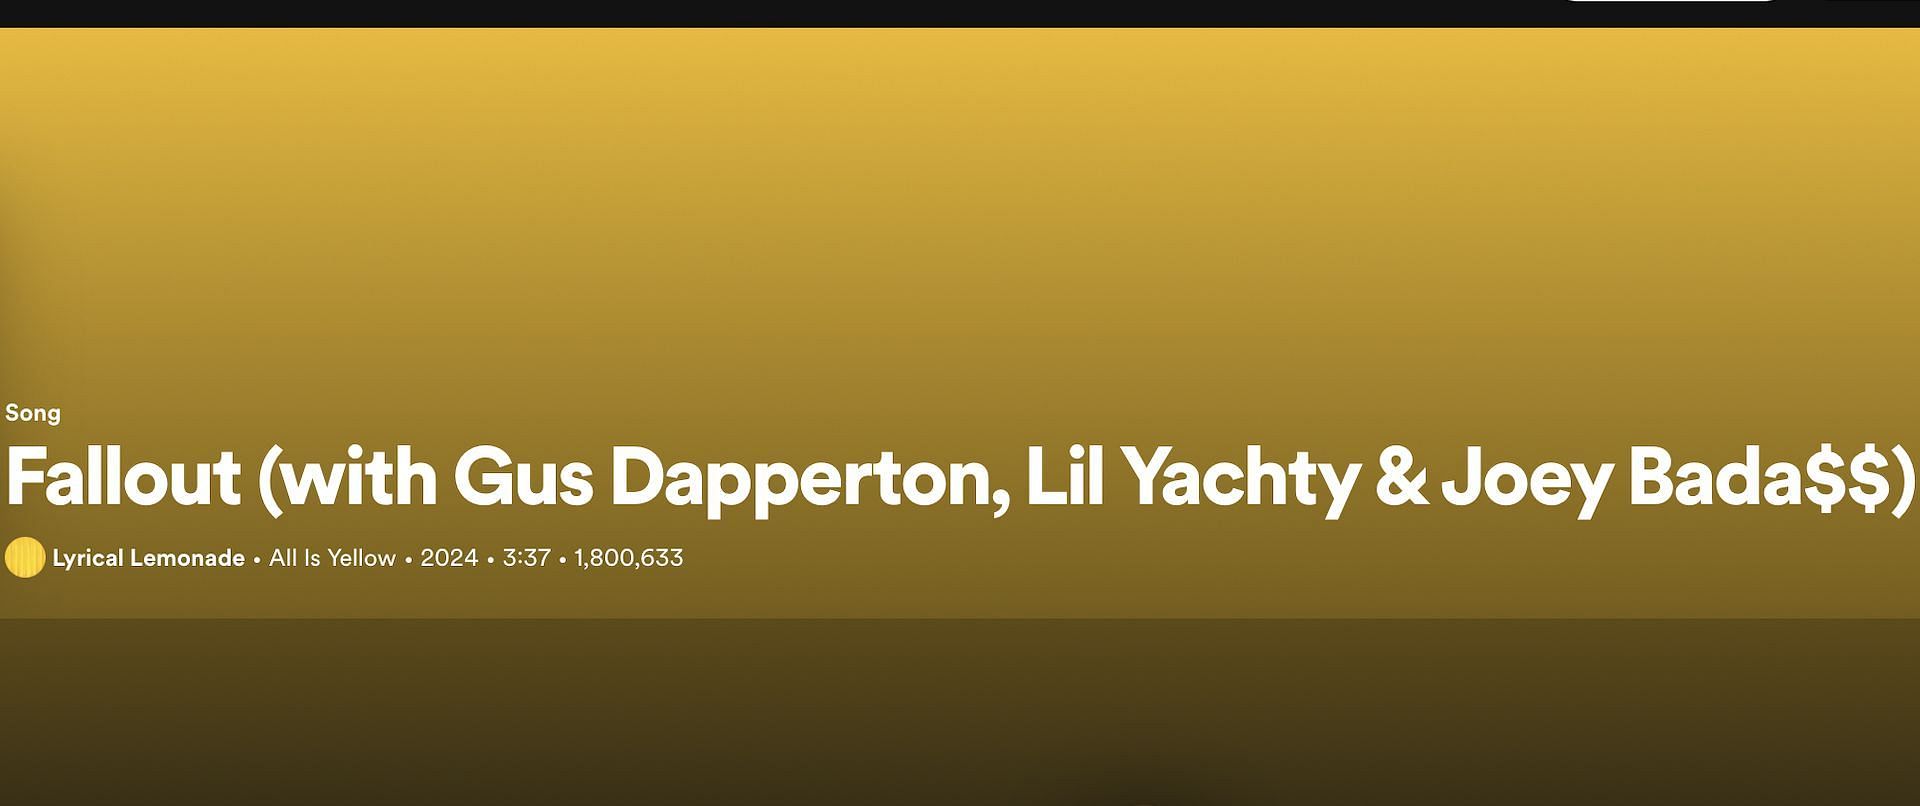 Track 10 from Lyrical Lemonade&#039;s All Is Yellow (Image via Spotify)